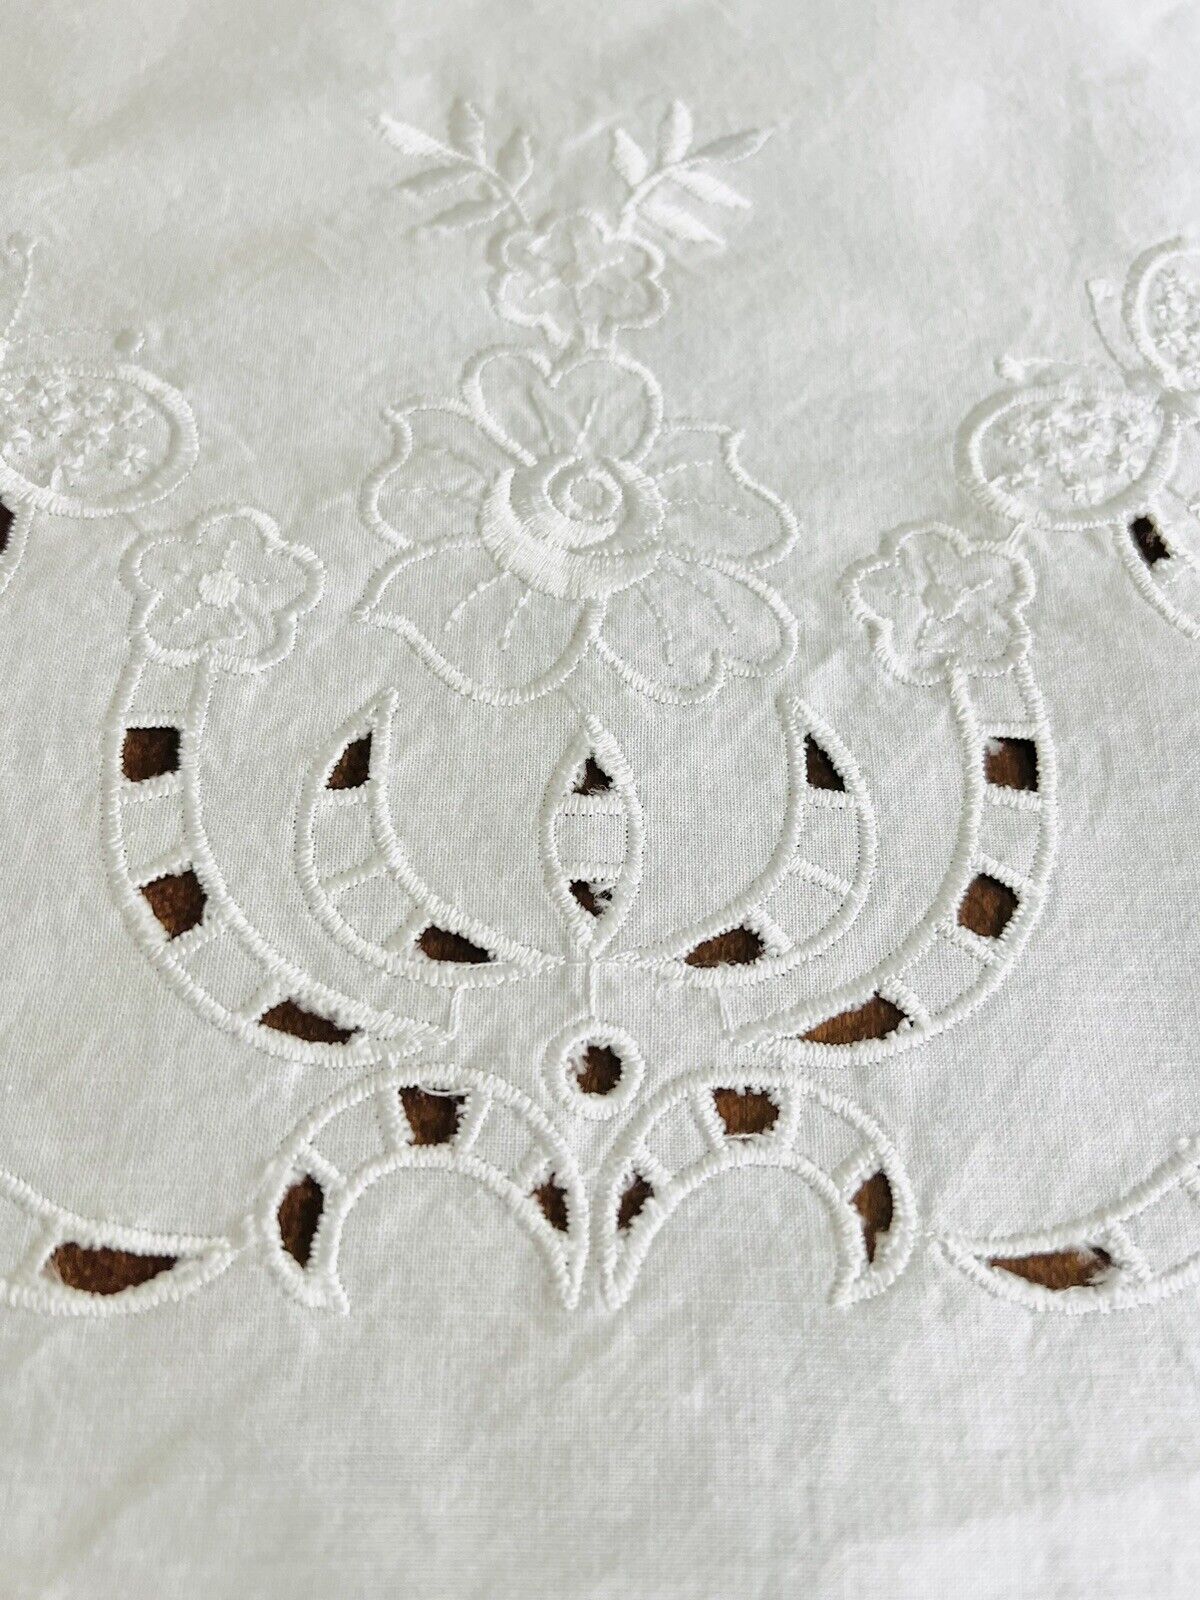 White round tablecloth with white embroidered flowers butterflies and cut outs